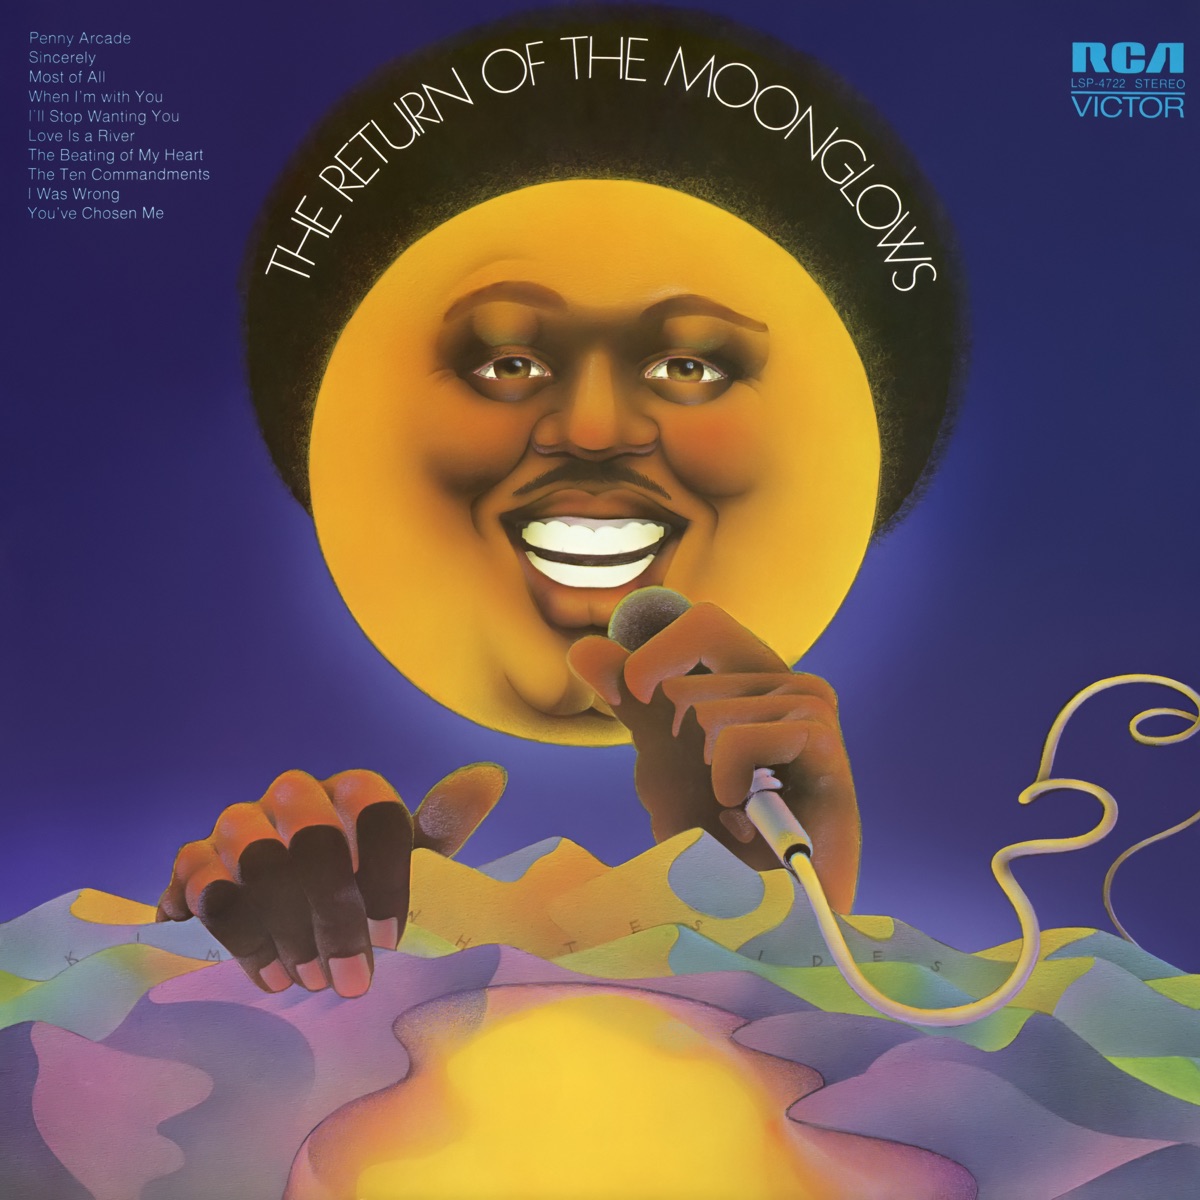 The Best Of Bobby Lester And The Moonglows by The Moonglows